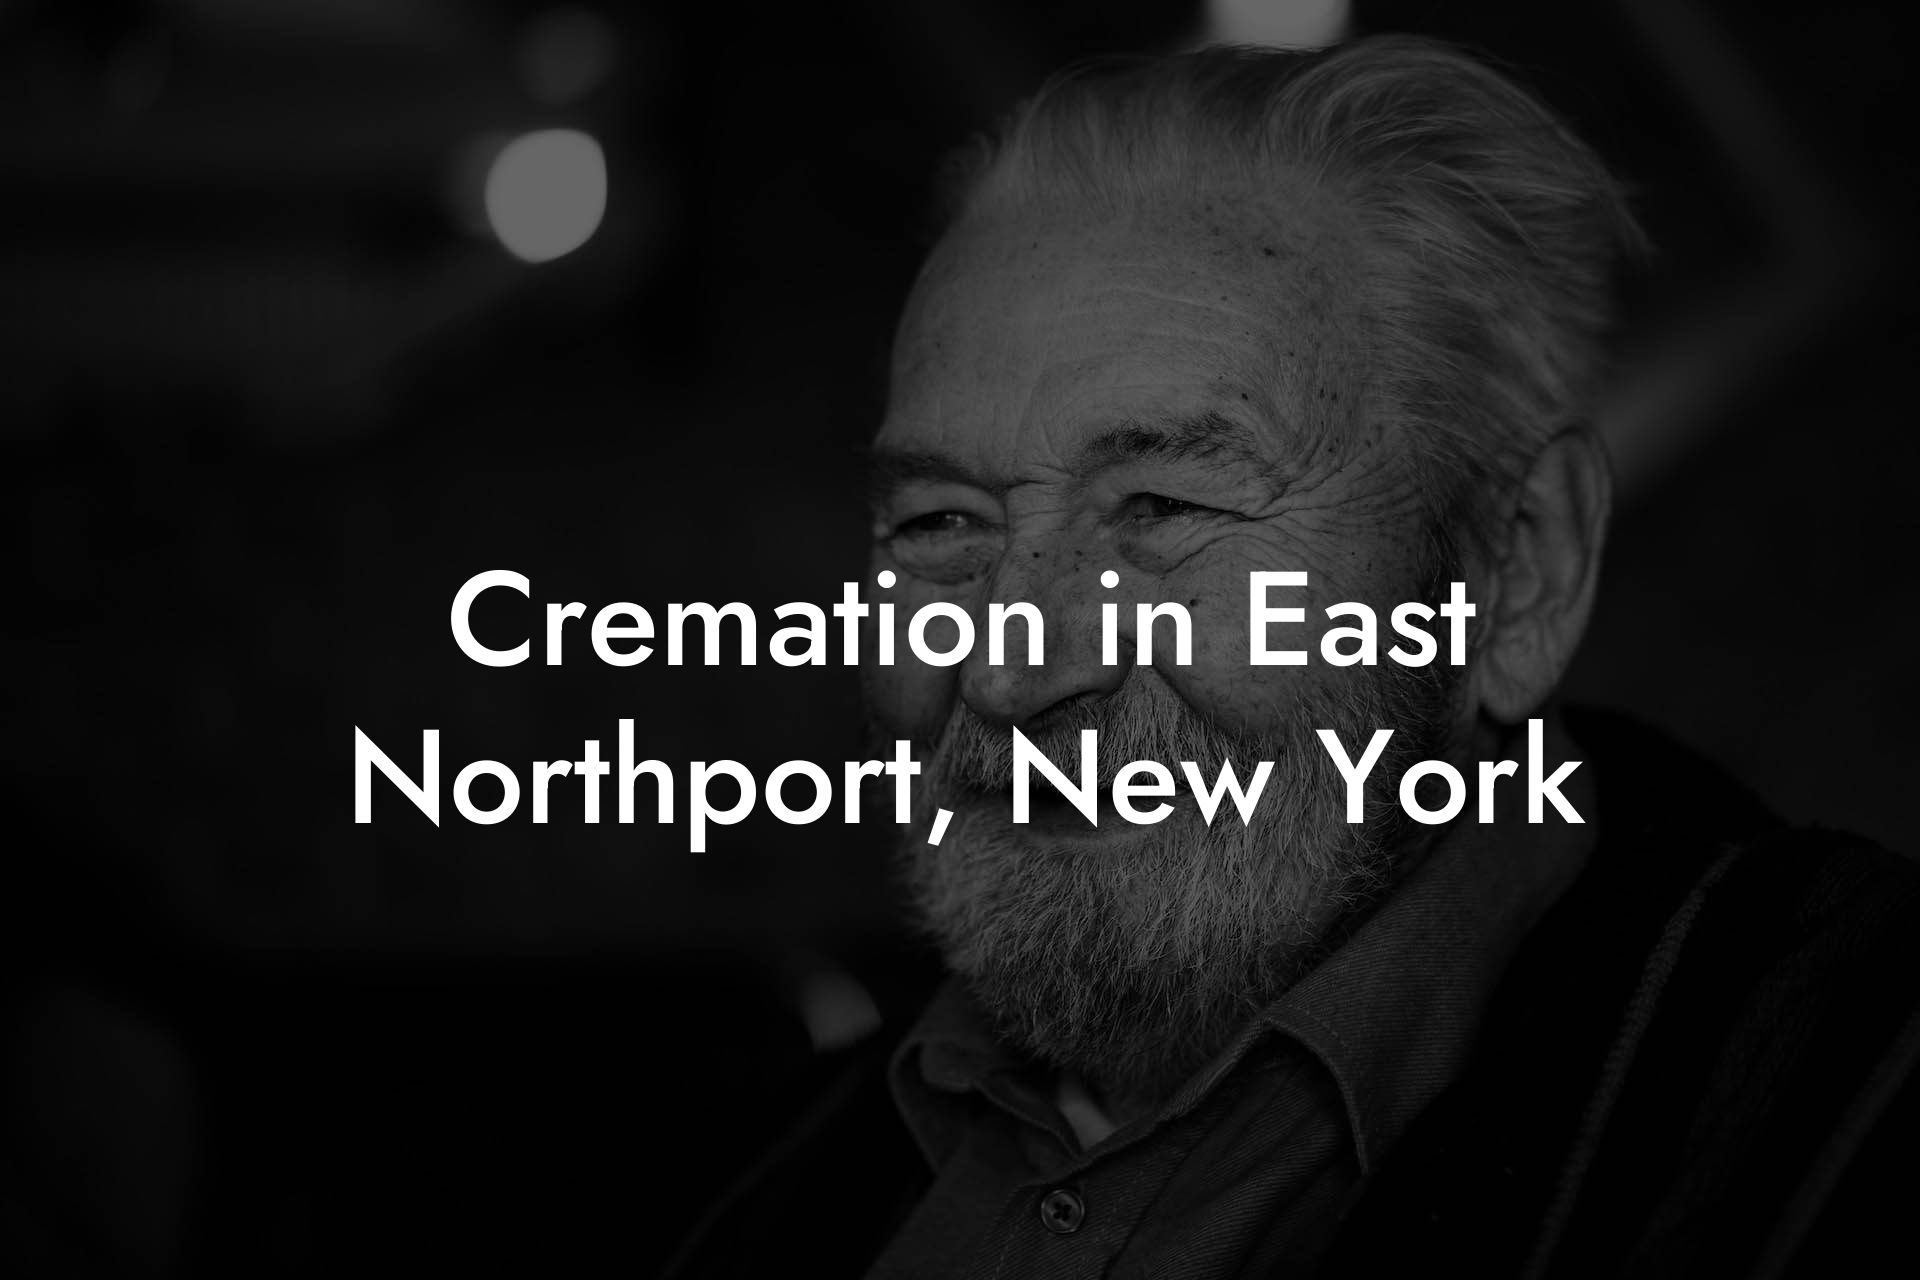 Cremation in East Northport, New York